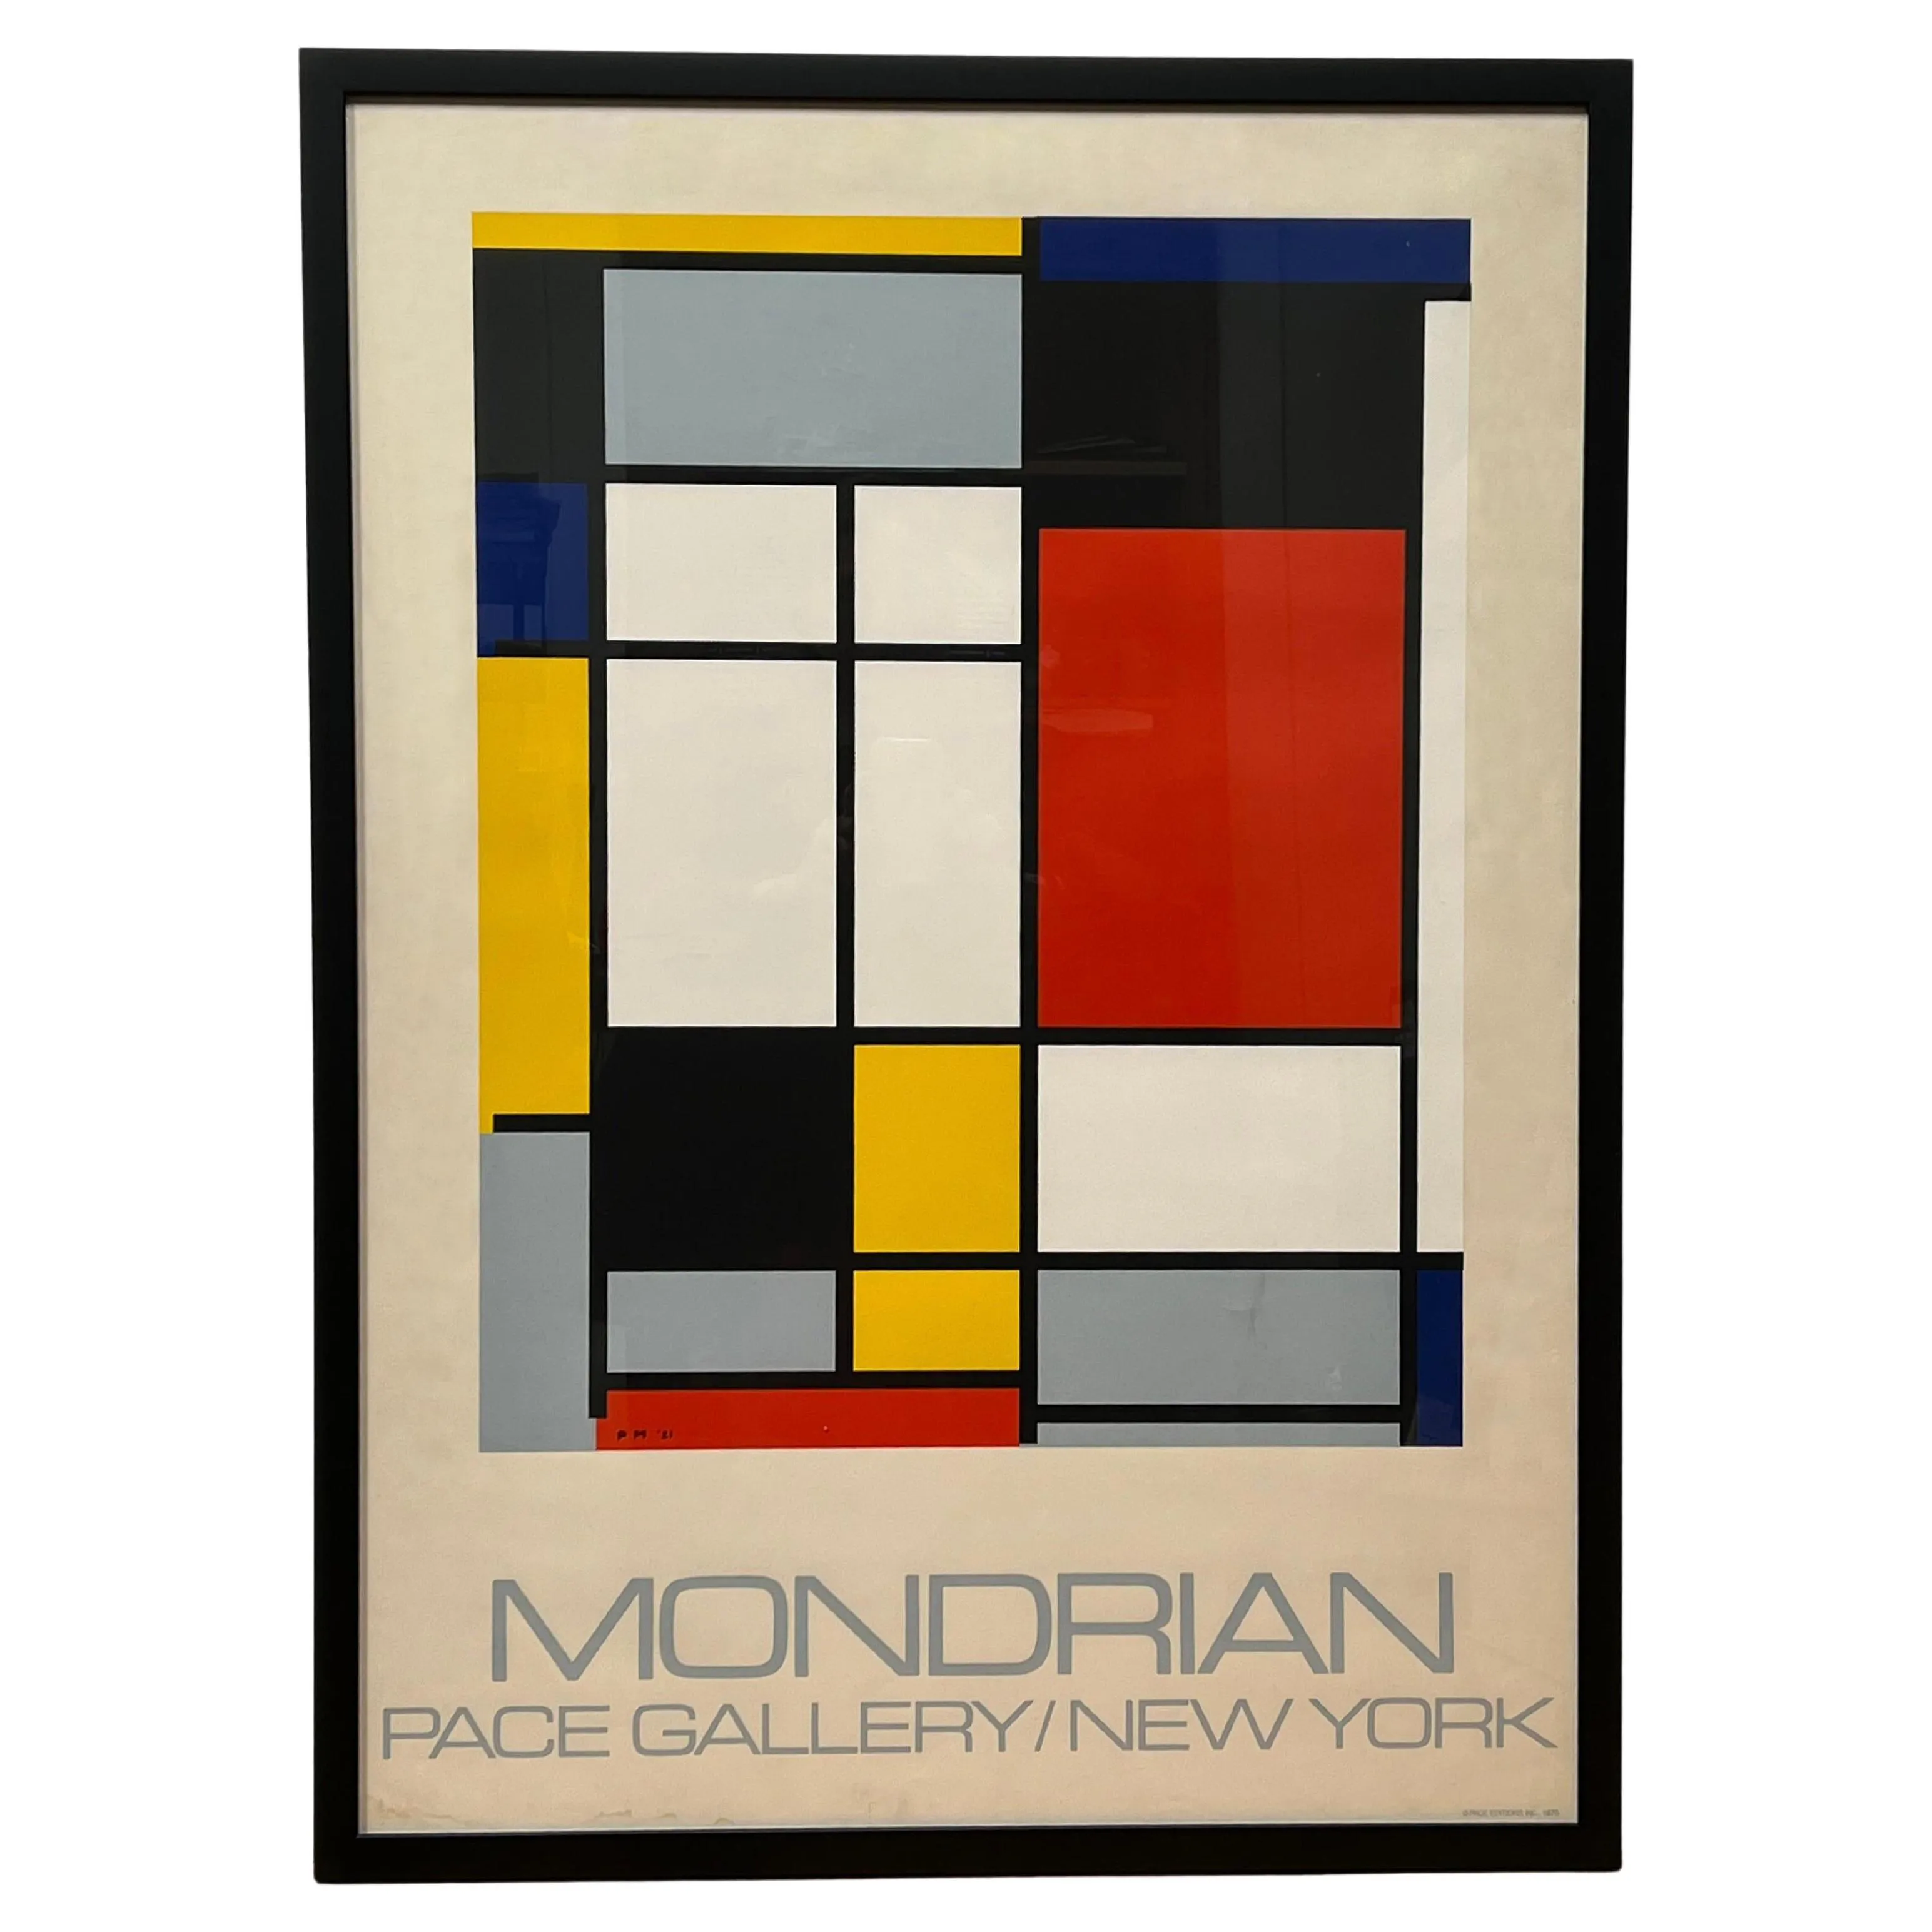 Original Poster by Piet Mondrian for Pace, 1970 by Piet Mondrian for sale